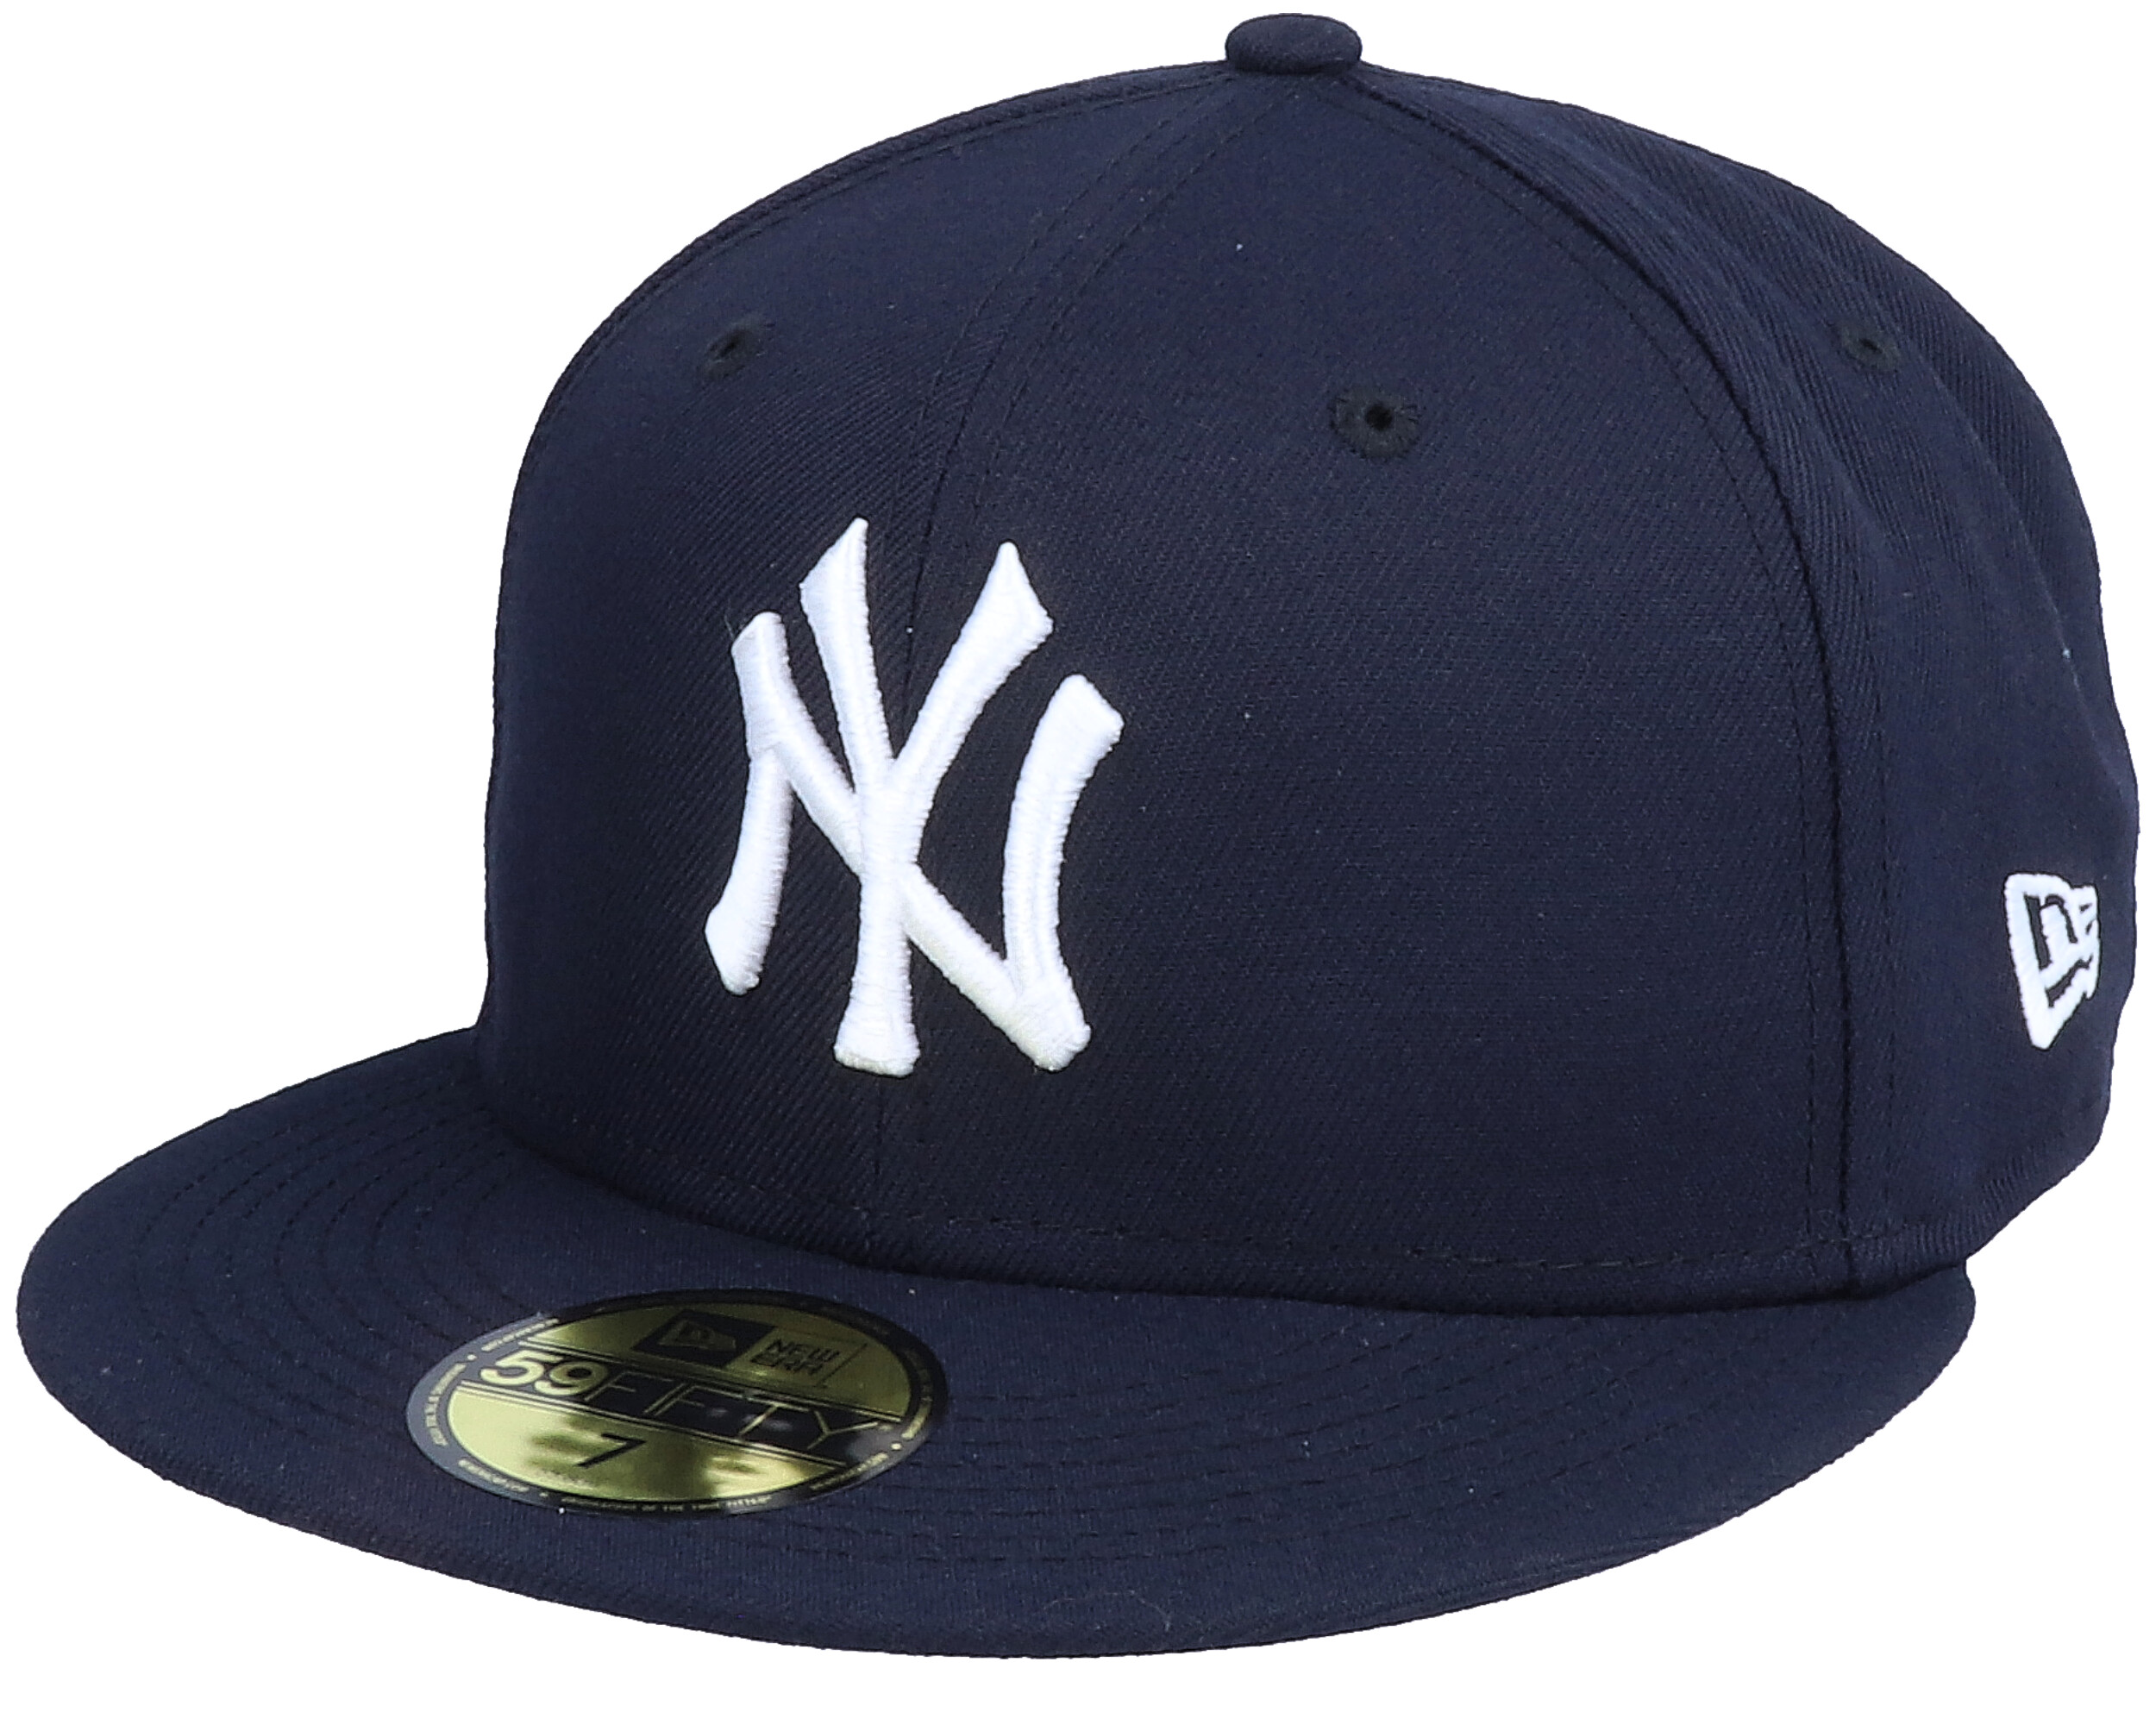 8 11783652-NAVY Size New Era Mlb18 5950 Wool Ws New York Yankee Fitted Hat Style 